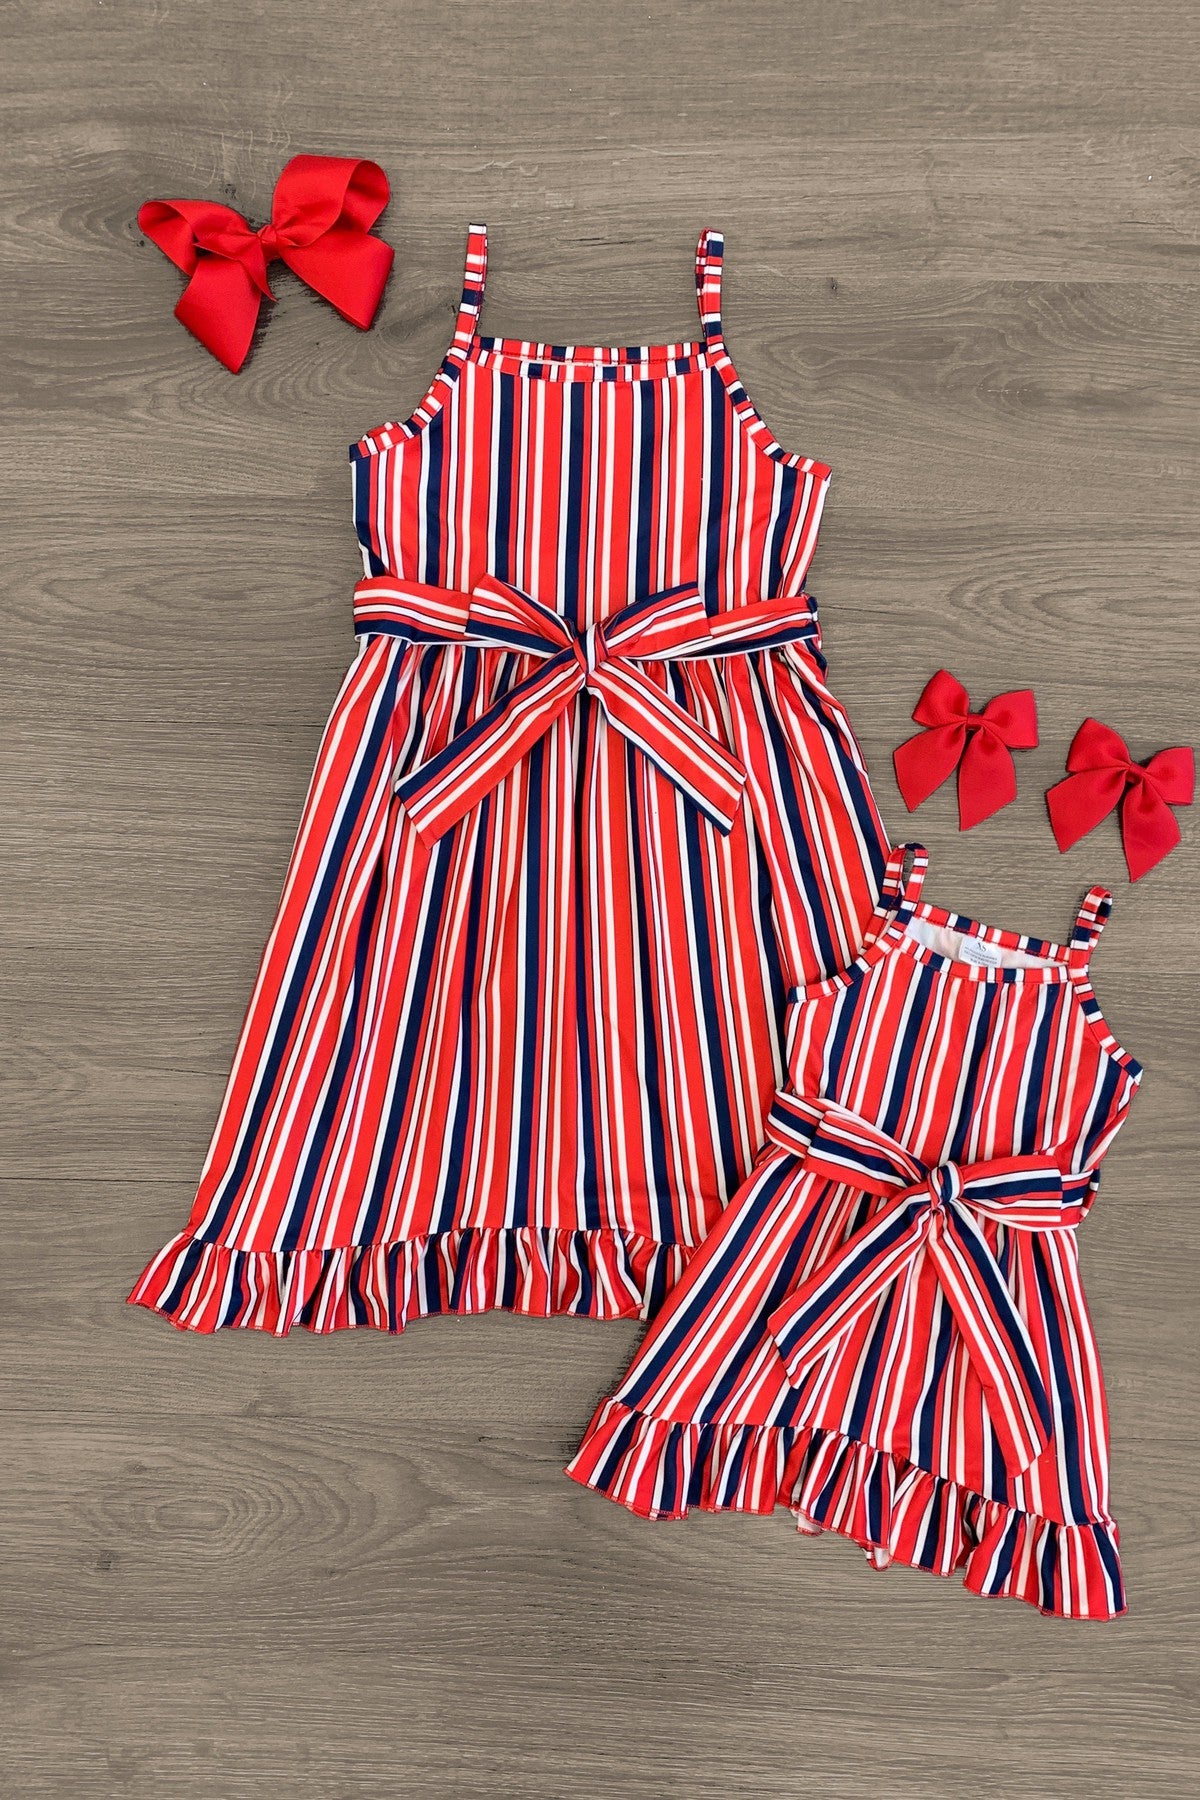 Mom & Me - Red White & Blue Striped Dress - Sparkle in Pink